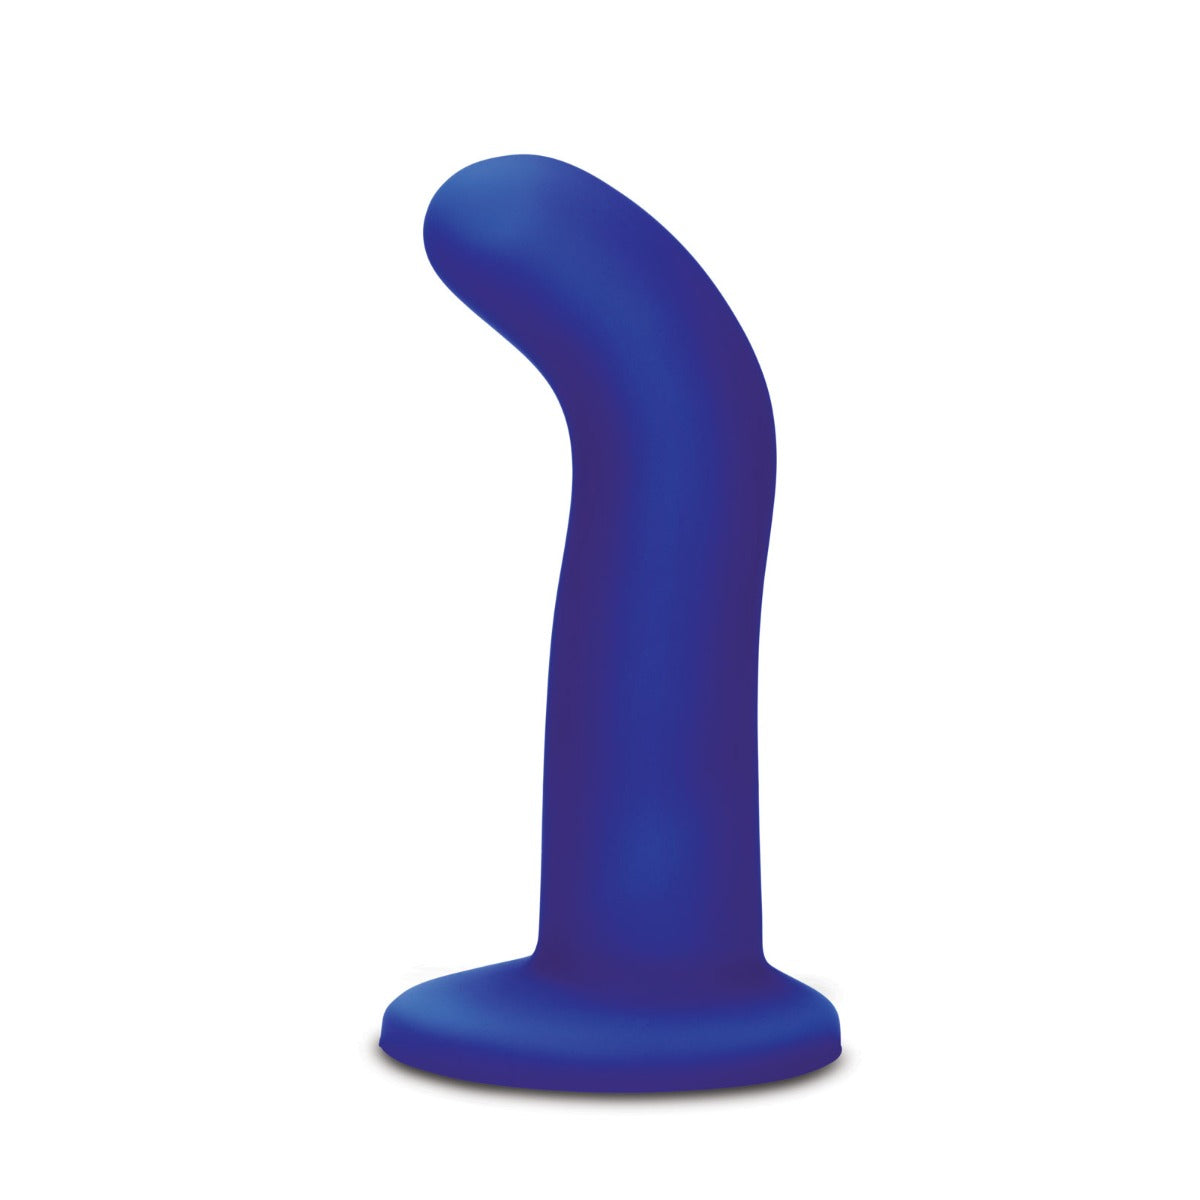 Whipsmart Curved 5.5 Inches Remote Control Vibrating Dildo | Navy